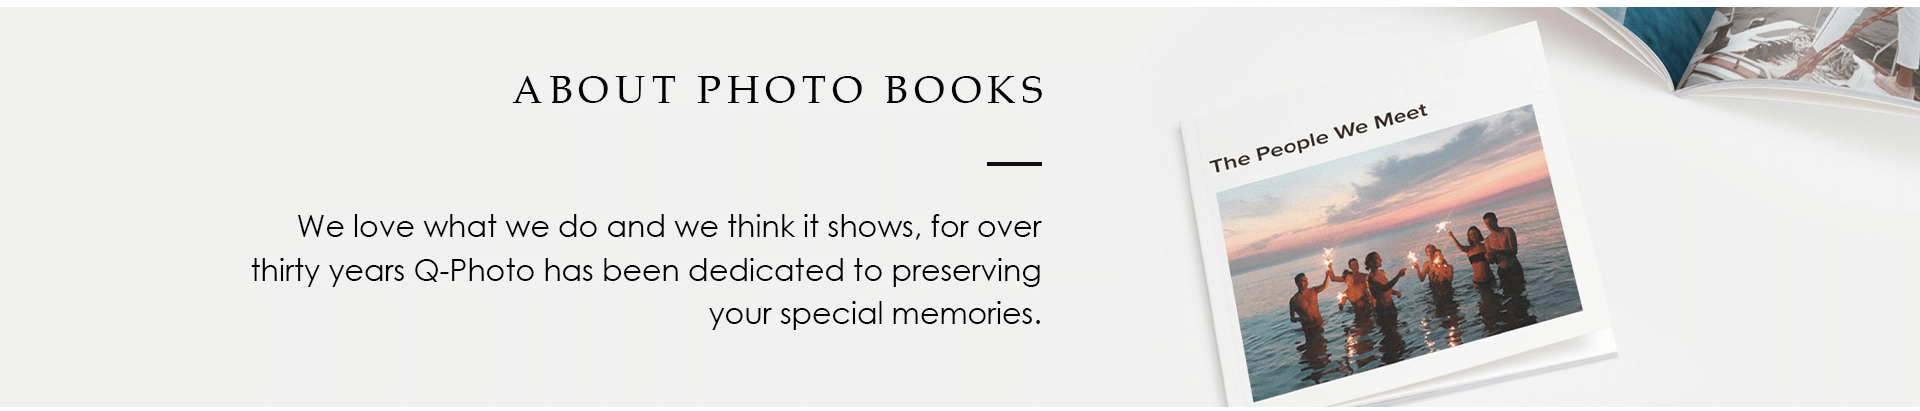 About Photo Books